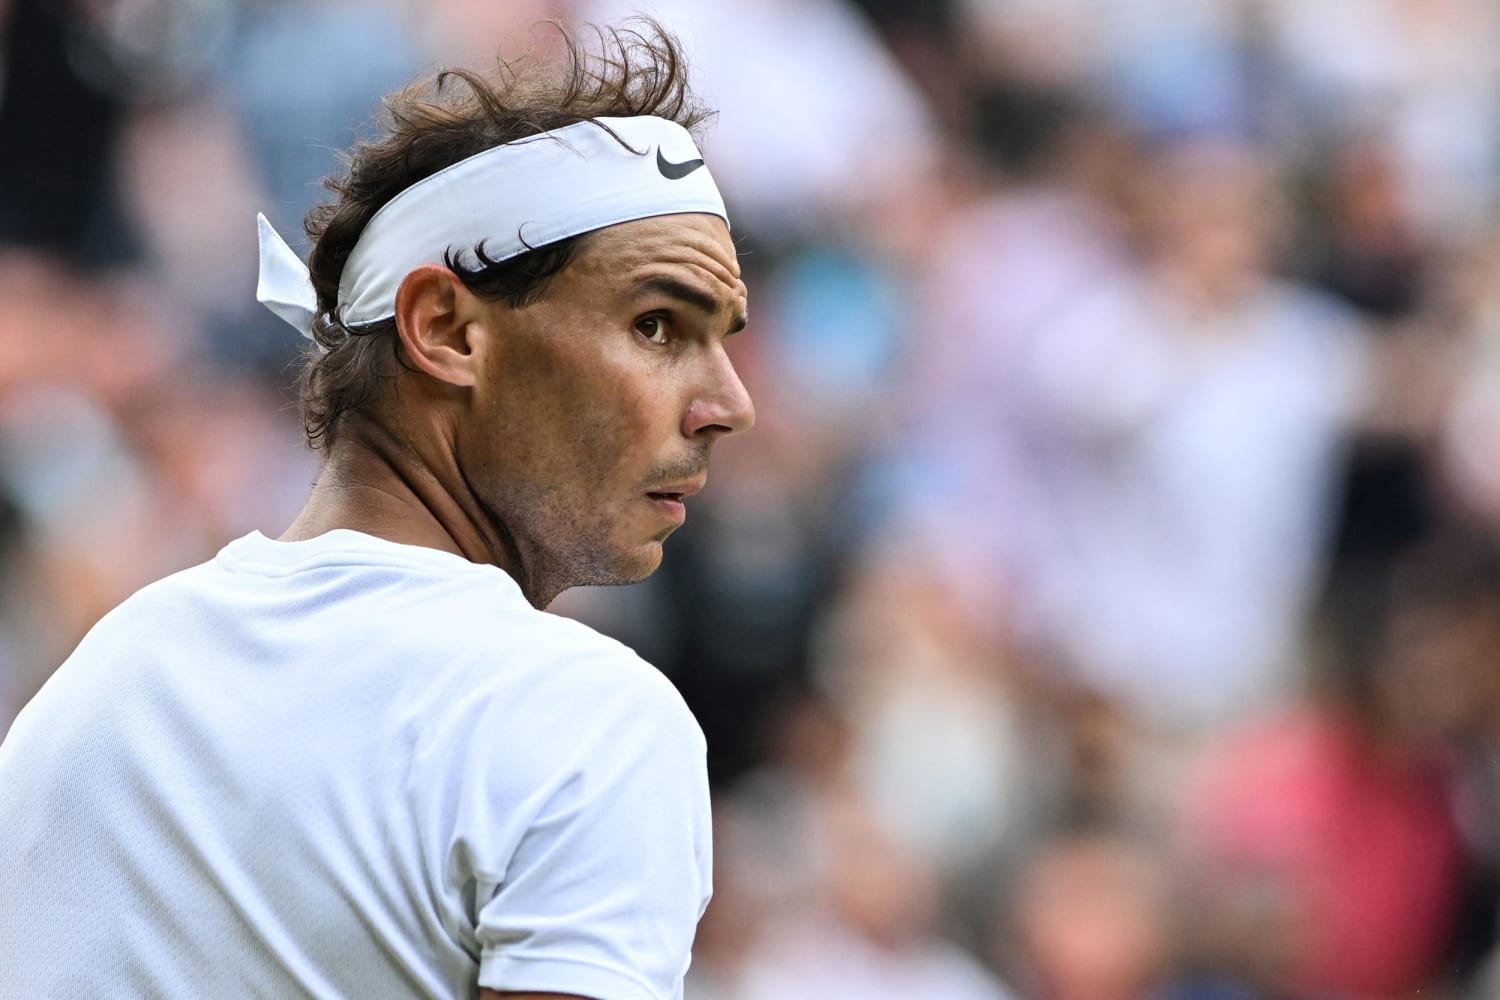 Rafael Nadal withdraws from Wimbledon before semifinal with abdominal injury